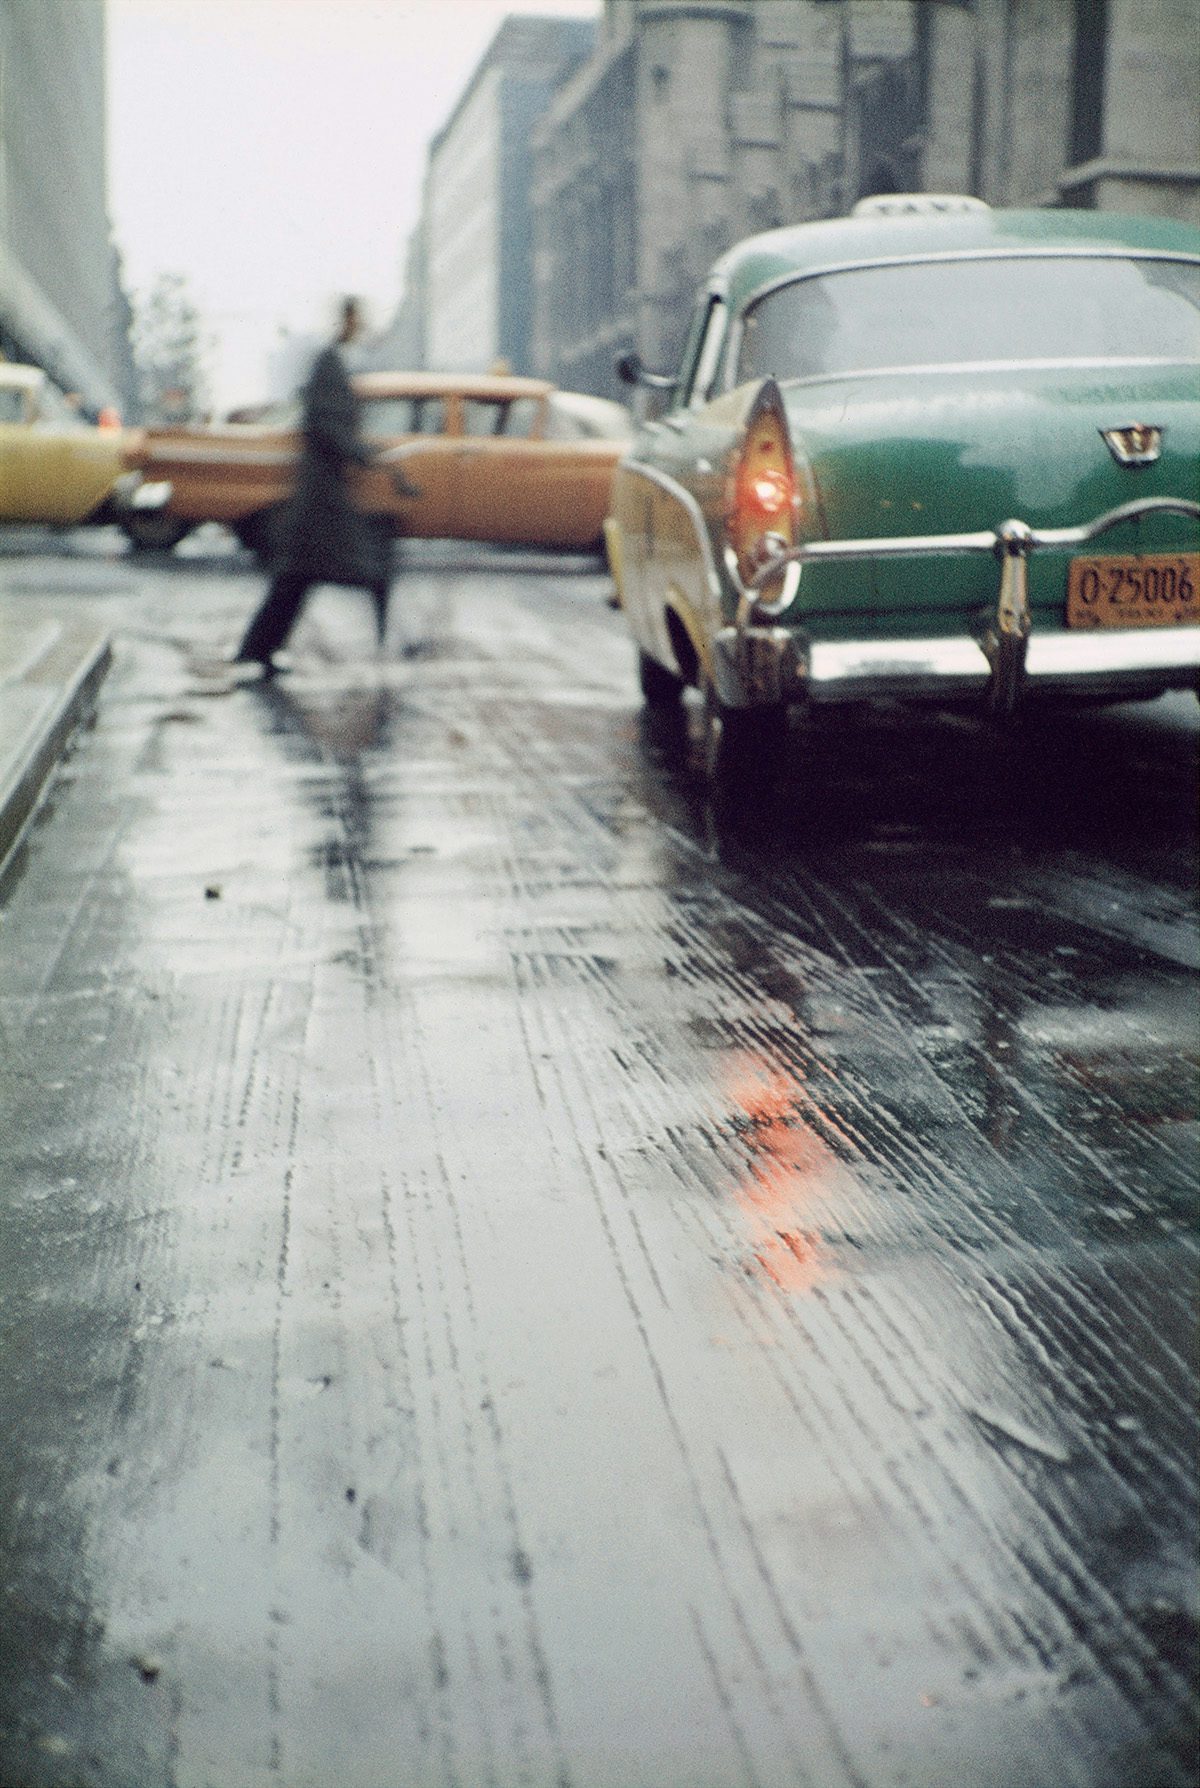 Photograph by Saul Leiter of a rainy city street with a blurred figure crossing the road in front of a green car